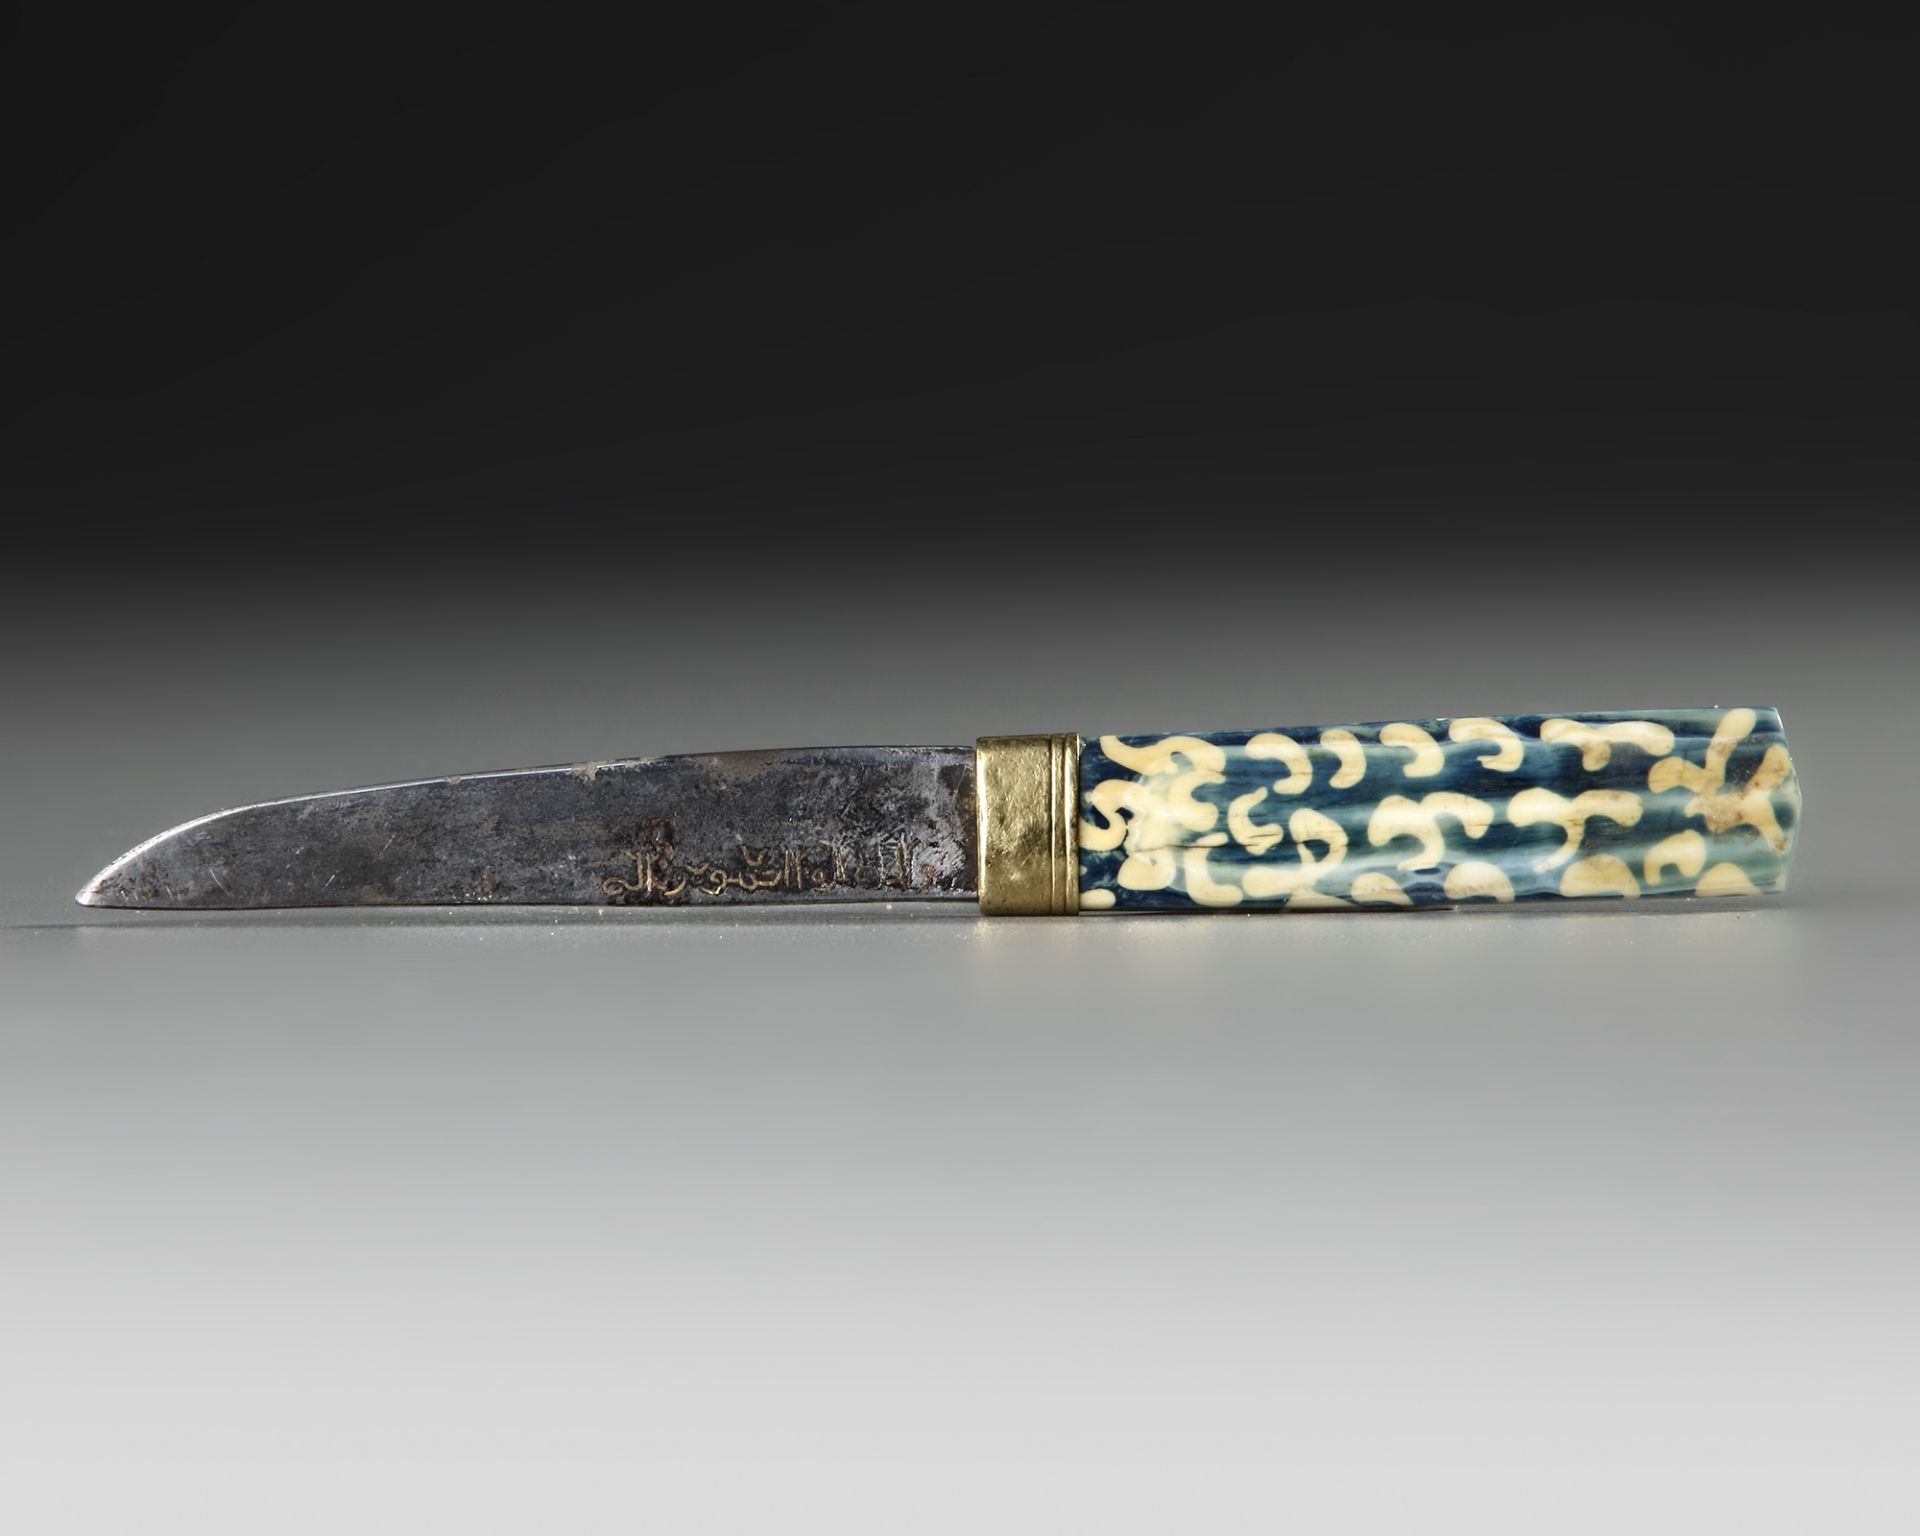 A SMALL INSCRIBED KNIFE, LATE TIMURID, 15TH-16TH CENTURY - Image 2 of 4